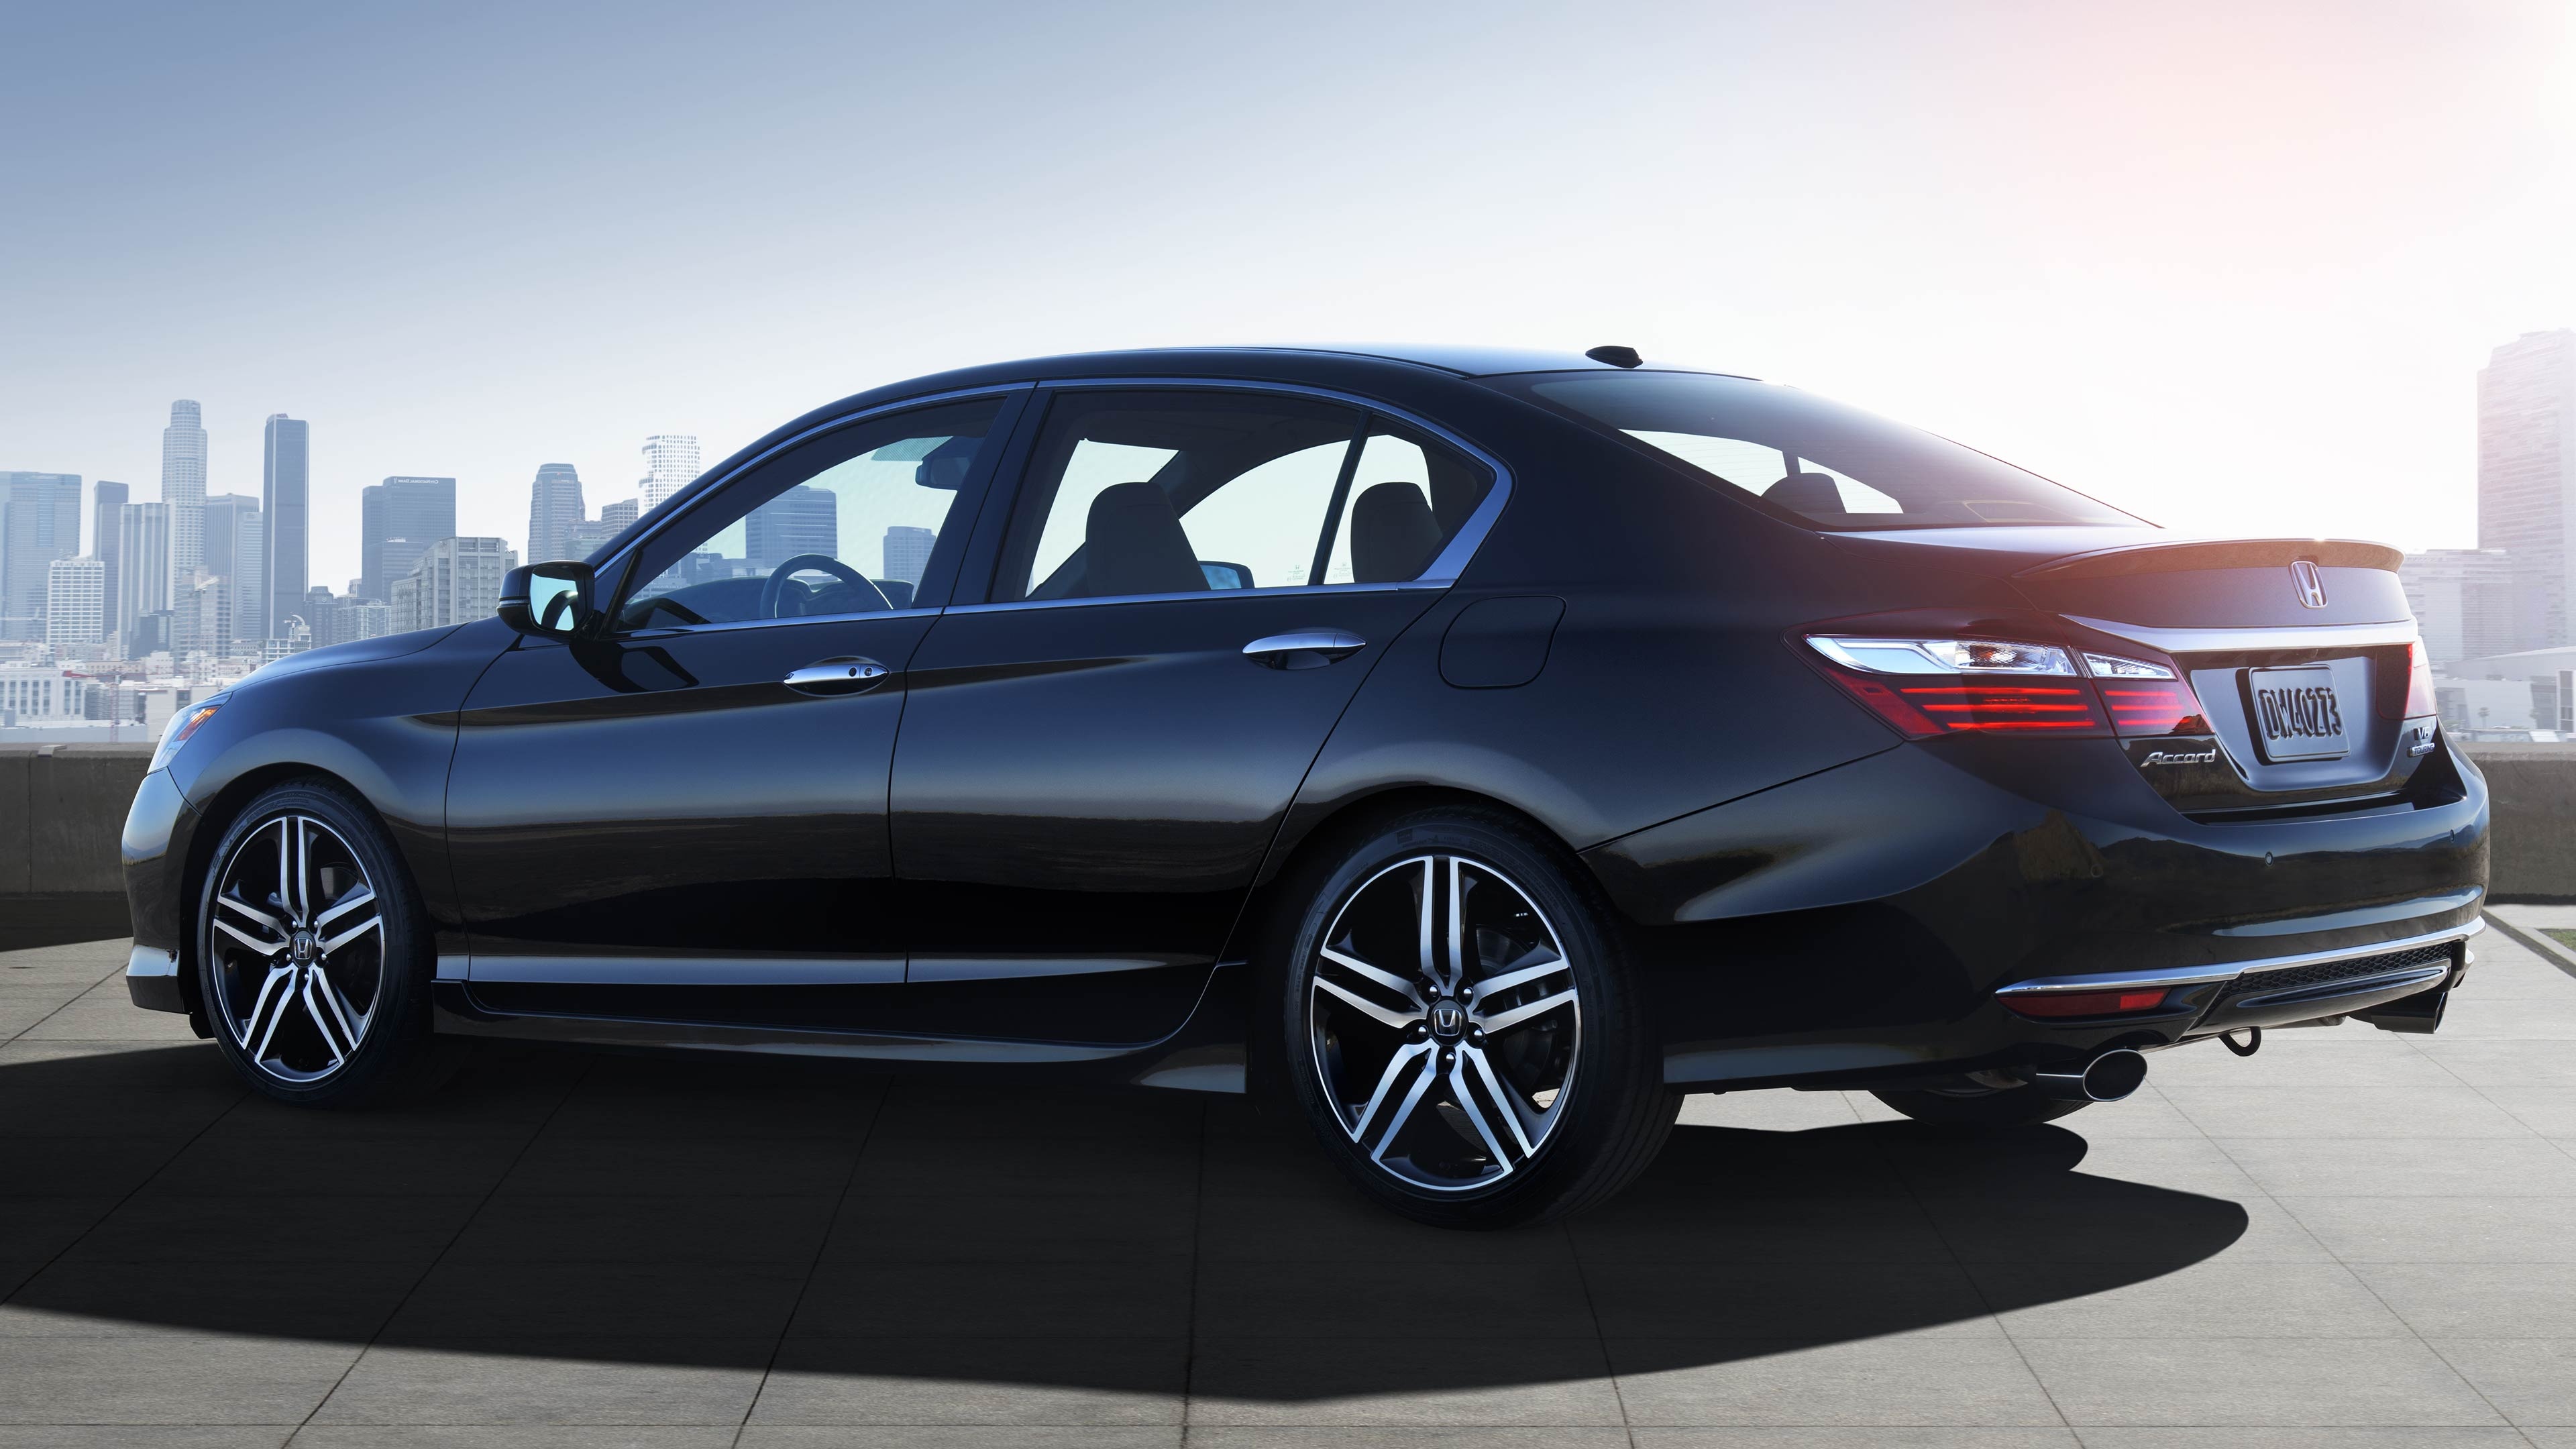 Honda Accord, Wallpaper collection, Sporty and elegant, Free to download, 3840x2160 4K Desktop